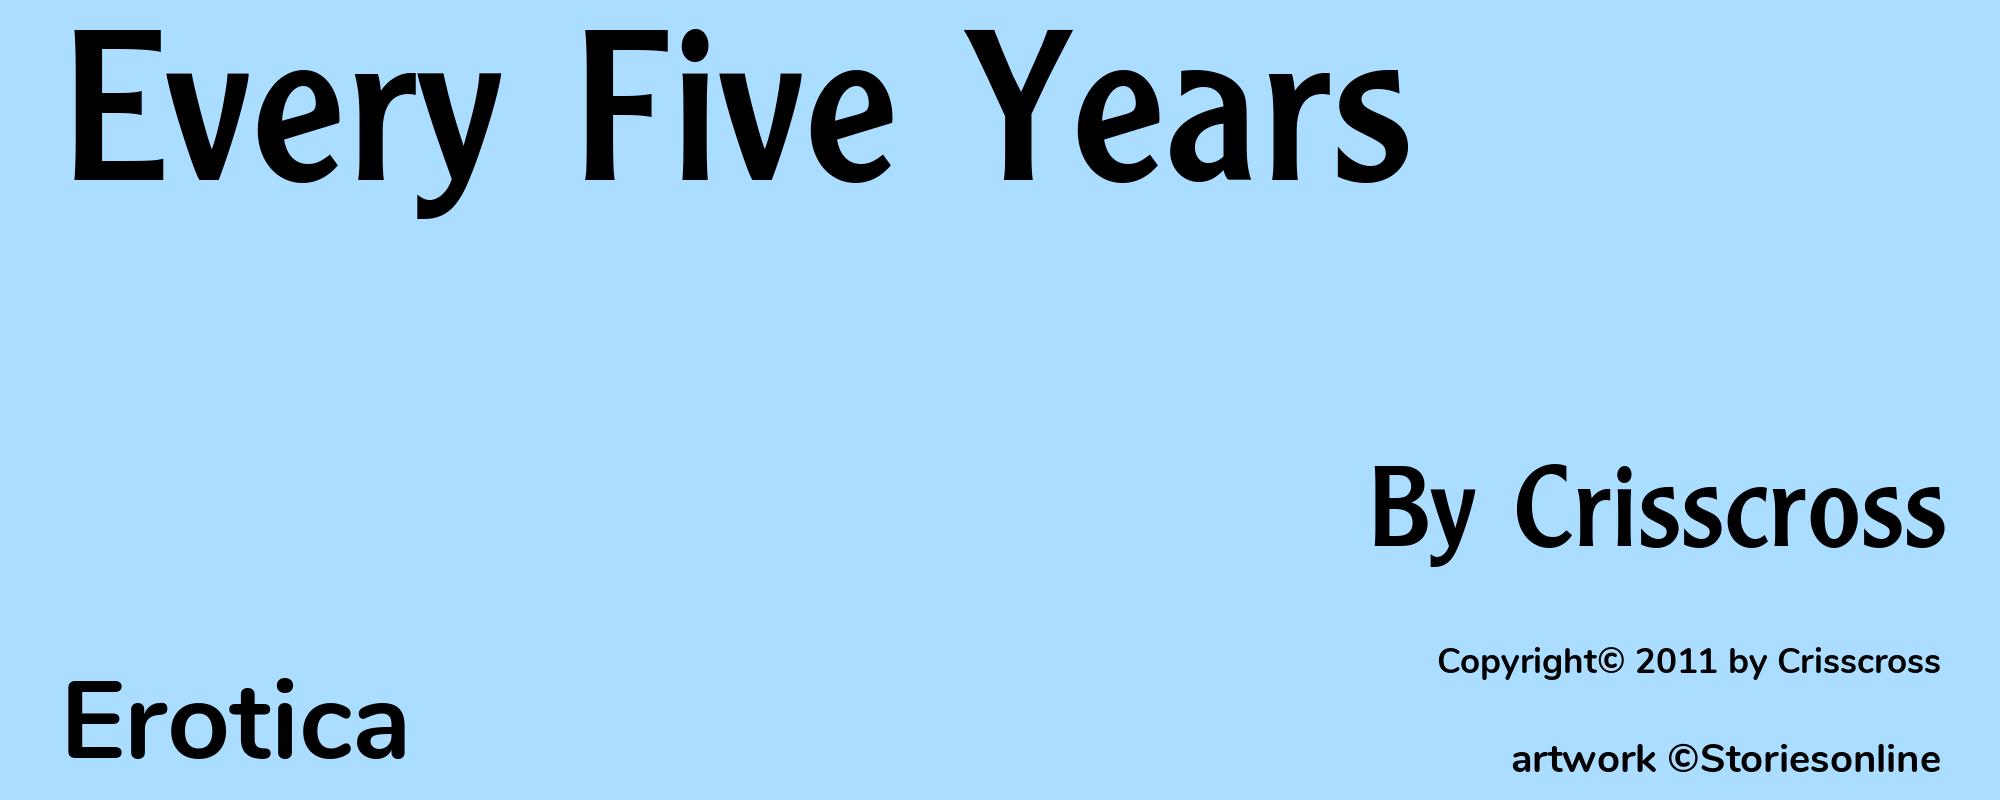 Every Five Years - Cover